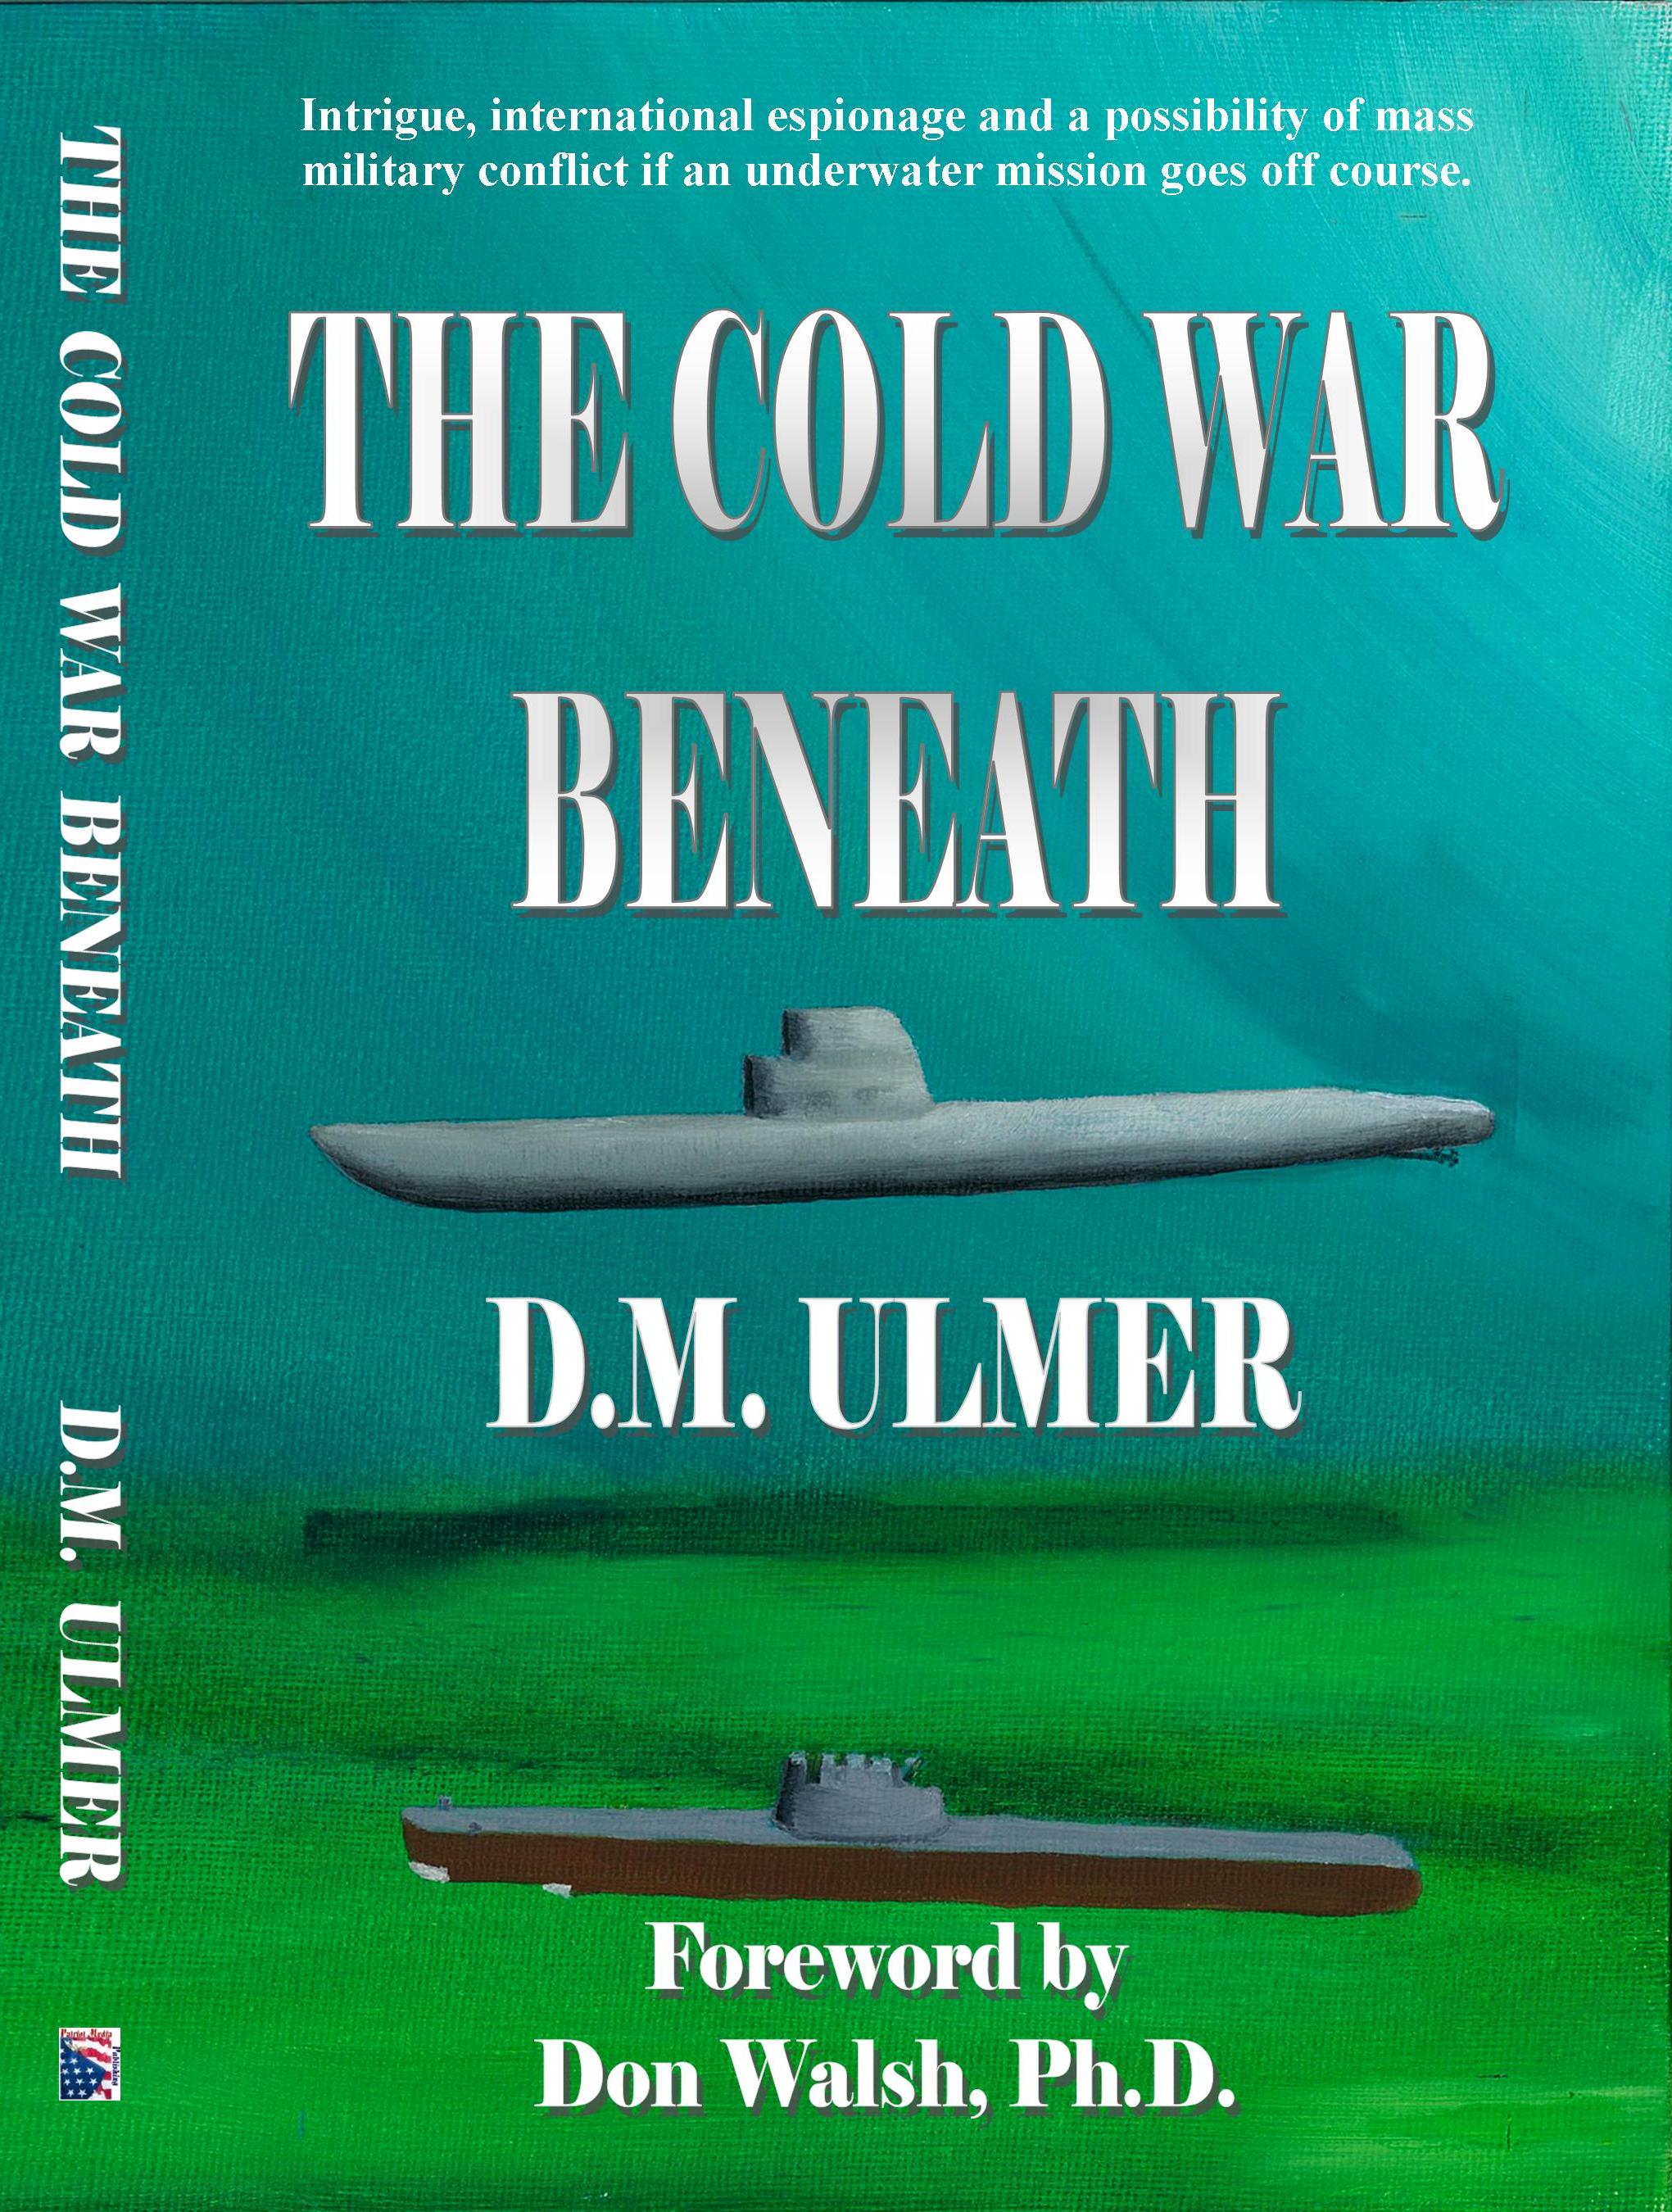 The Cold War Beneath by D.M. Ulmer